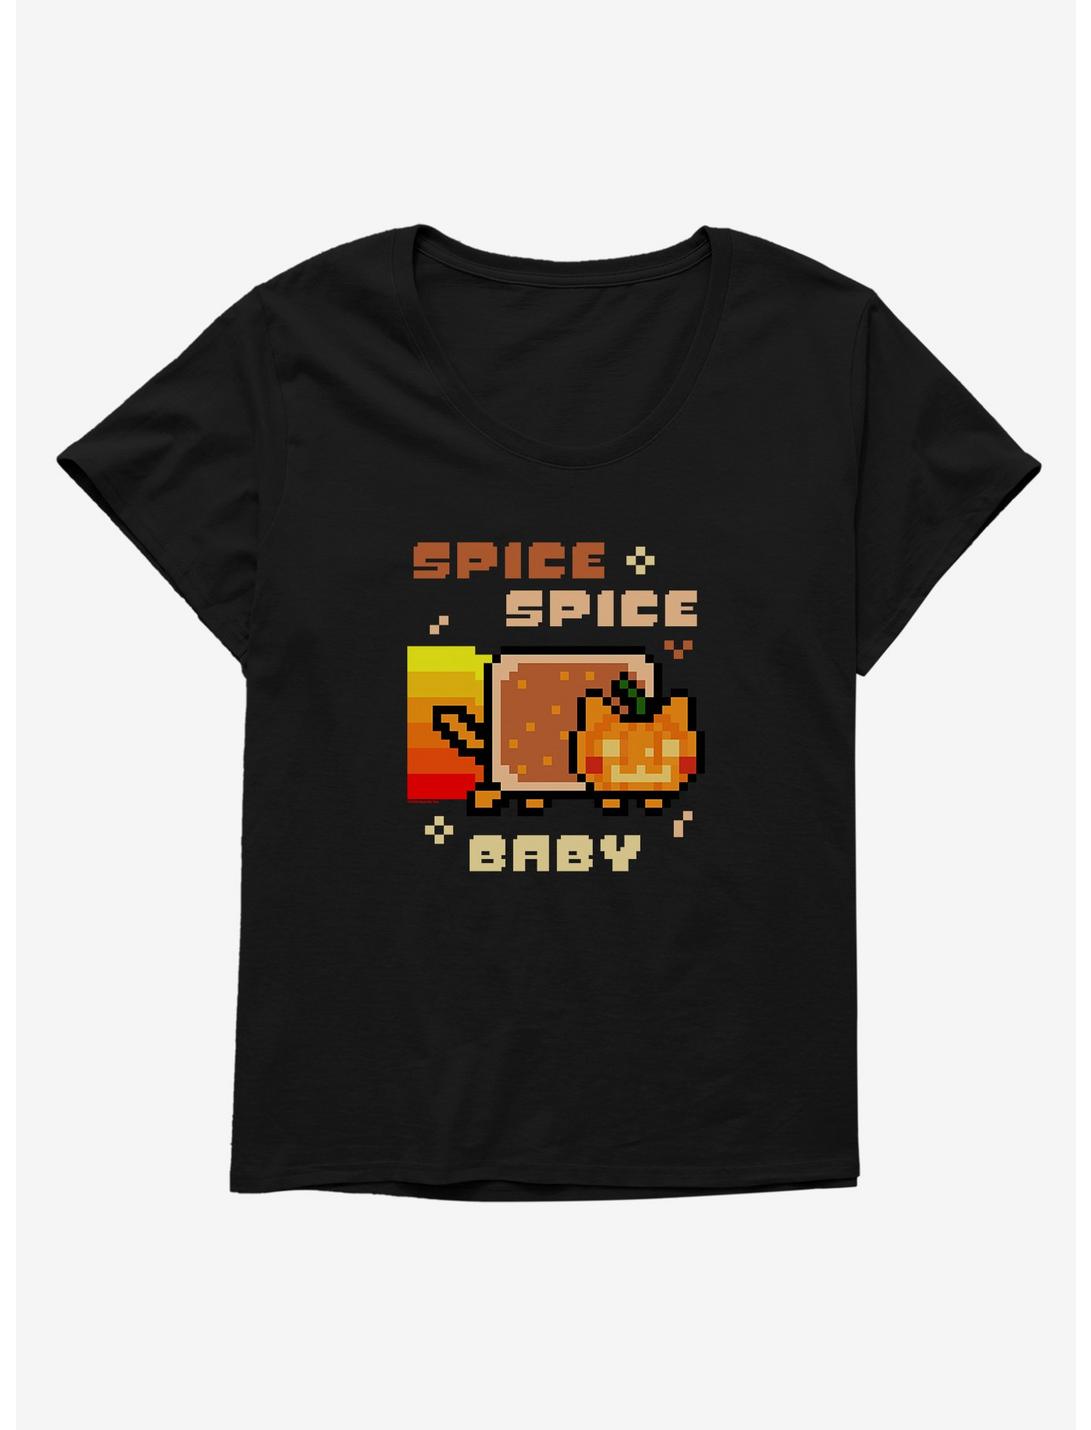 Nyan Cat Spice Spice Baby Womens T-Shirt Plus Size, BLACK, hi-res